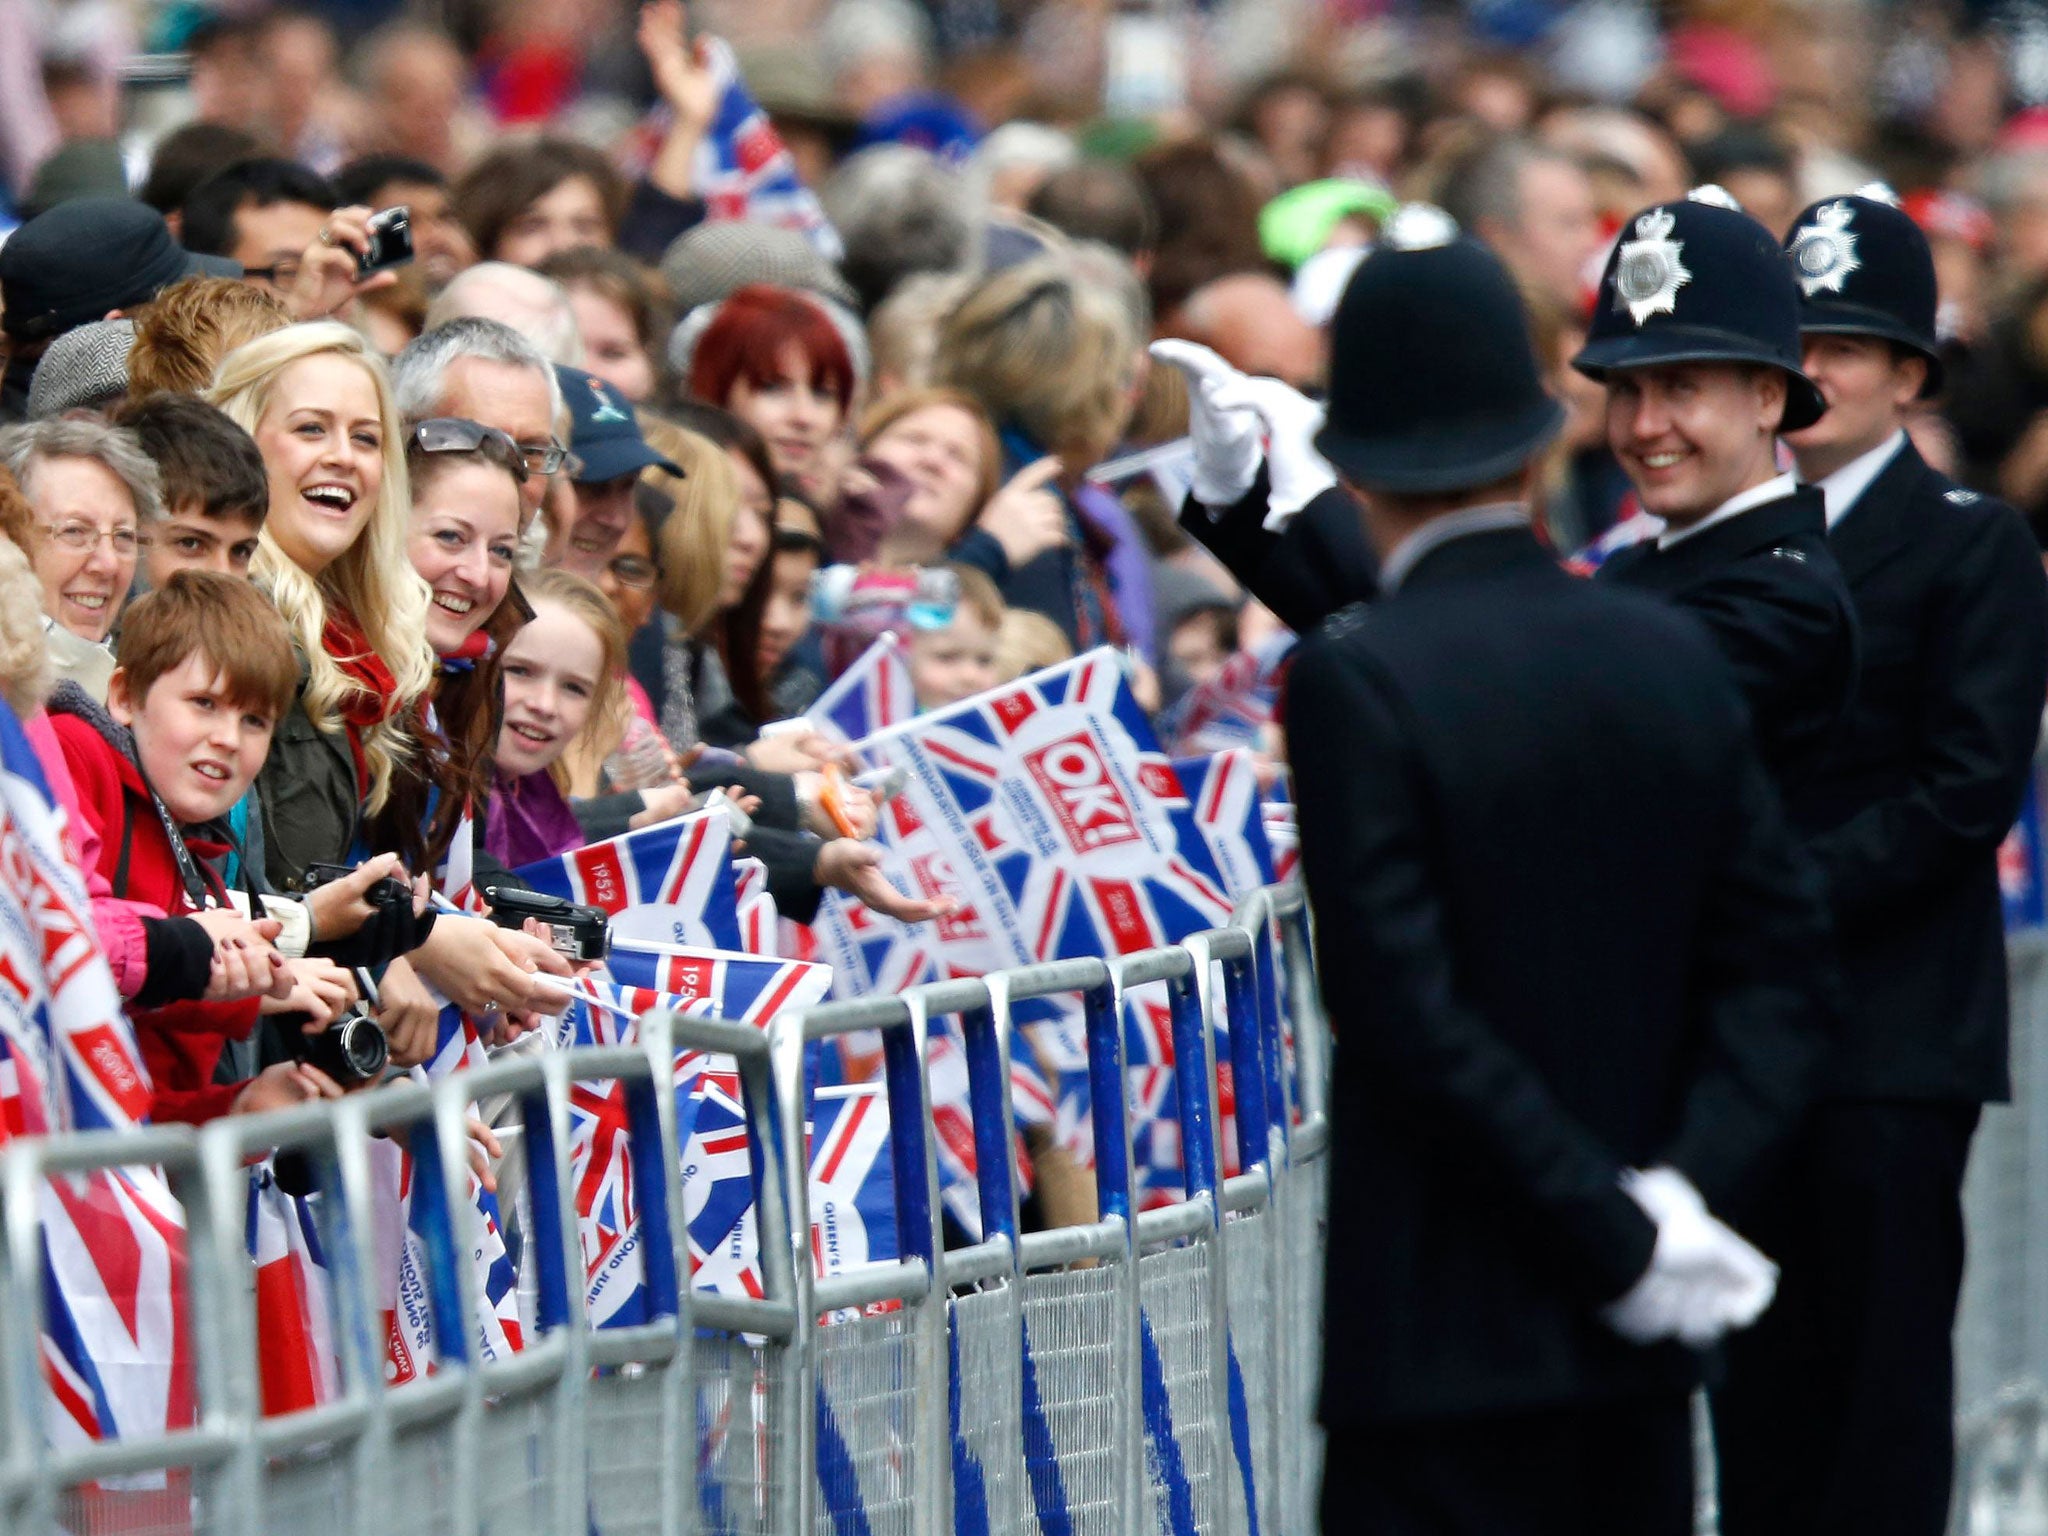 The Government says people in the UK are slightly happier in 2013 because of the Olympics and Diamond Jubilee celebrations